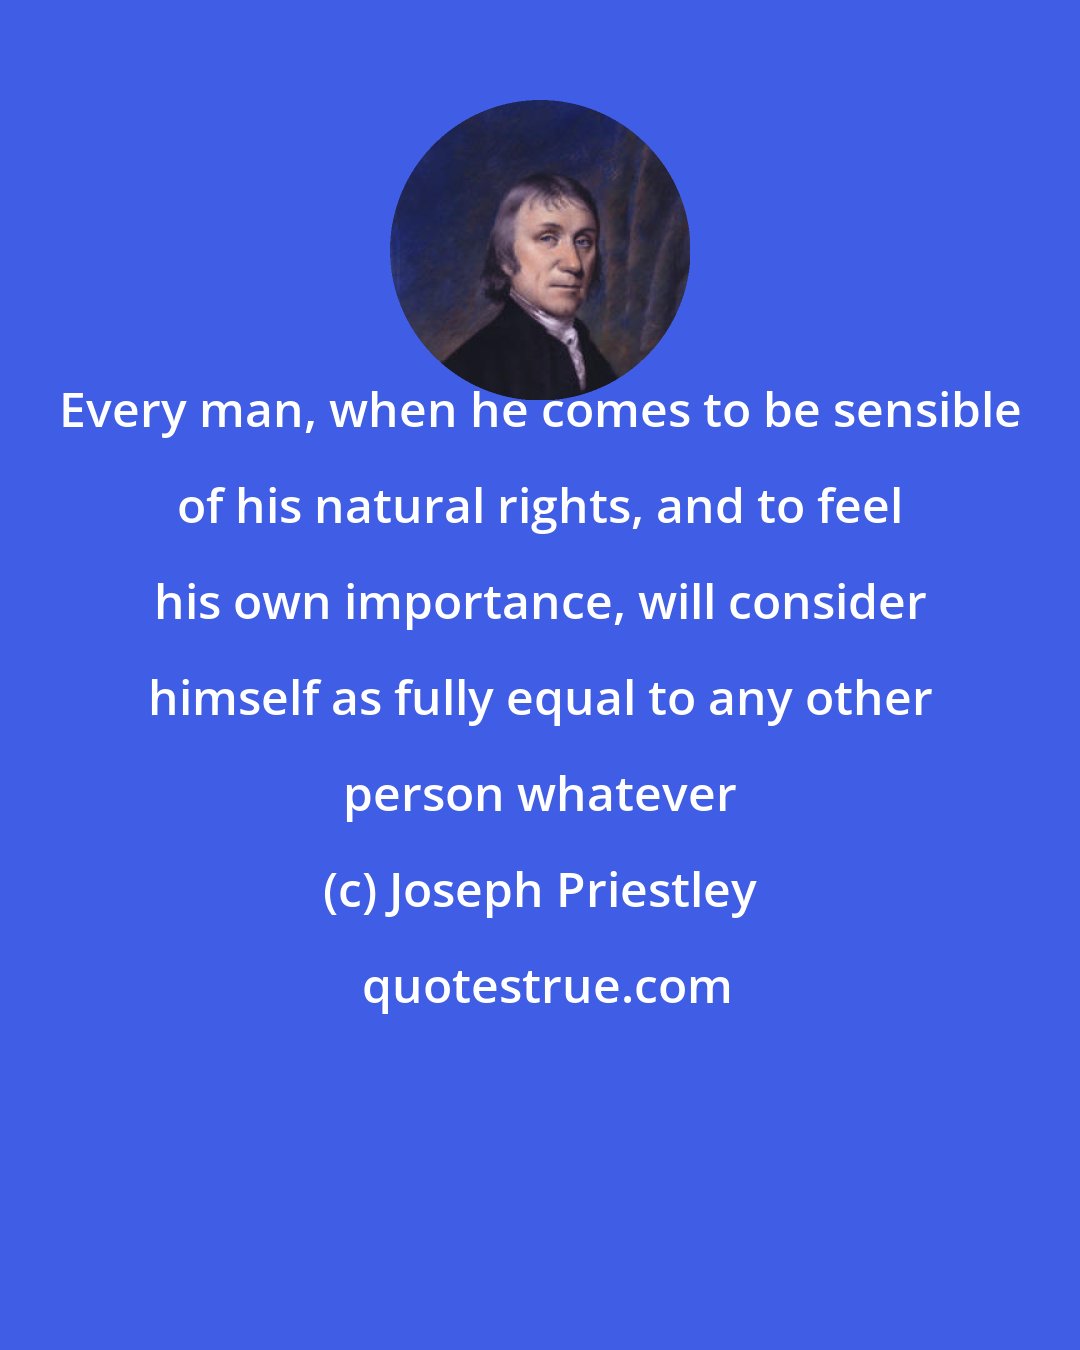 Joseph Priestley: Every man, when he comes to be sensible of his natural rights, and to feel his own importance, will consider himself as fully equal to any other person whatever